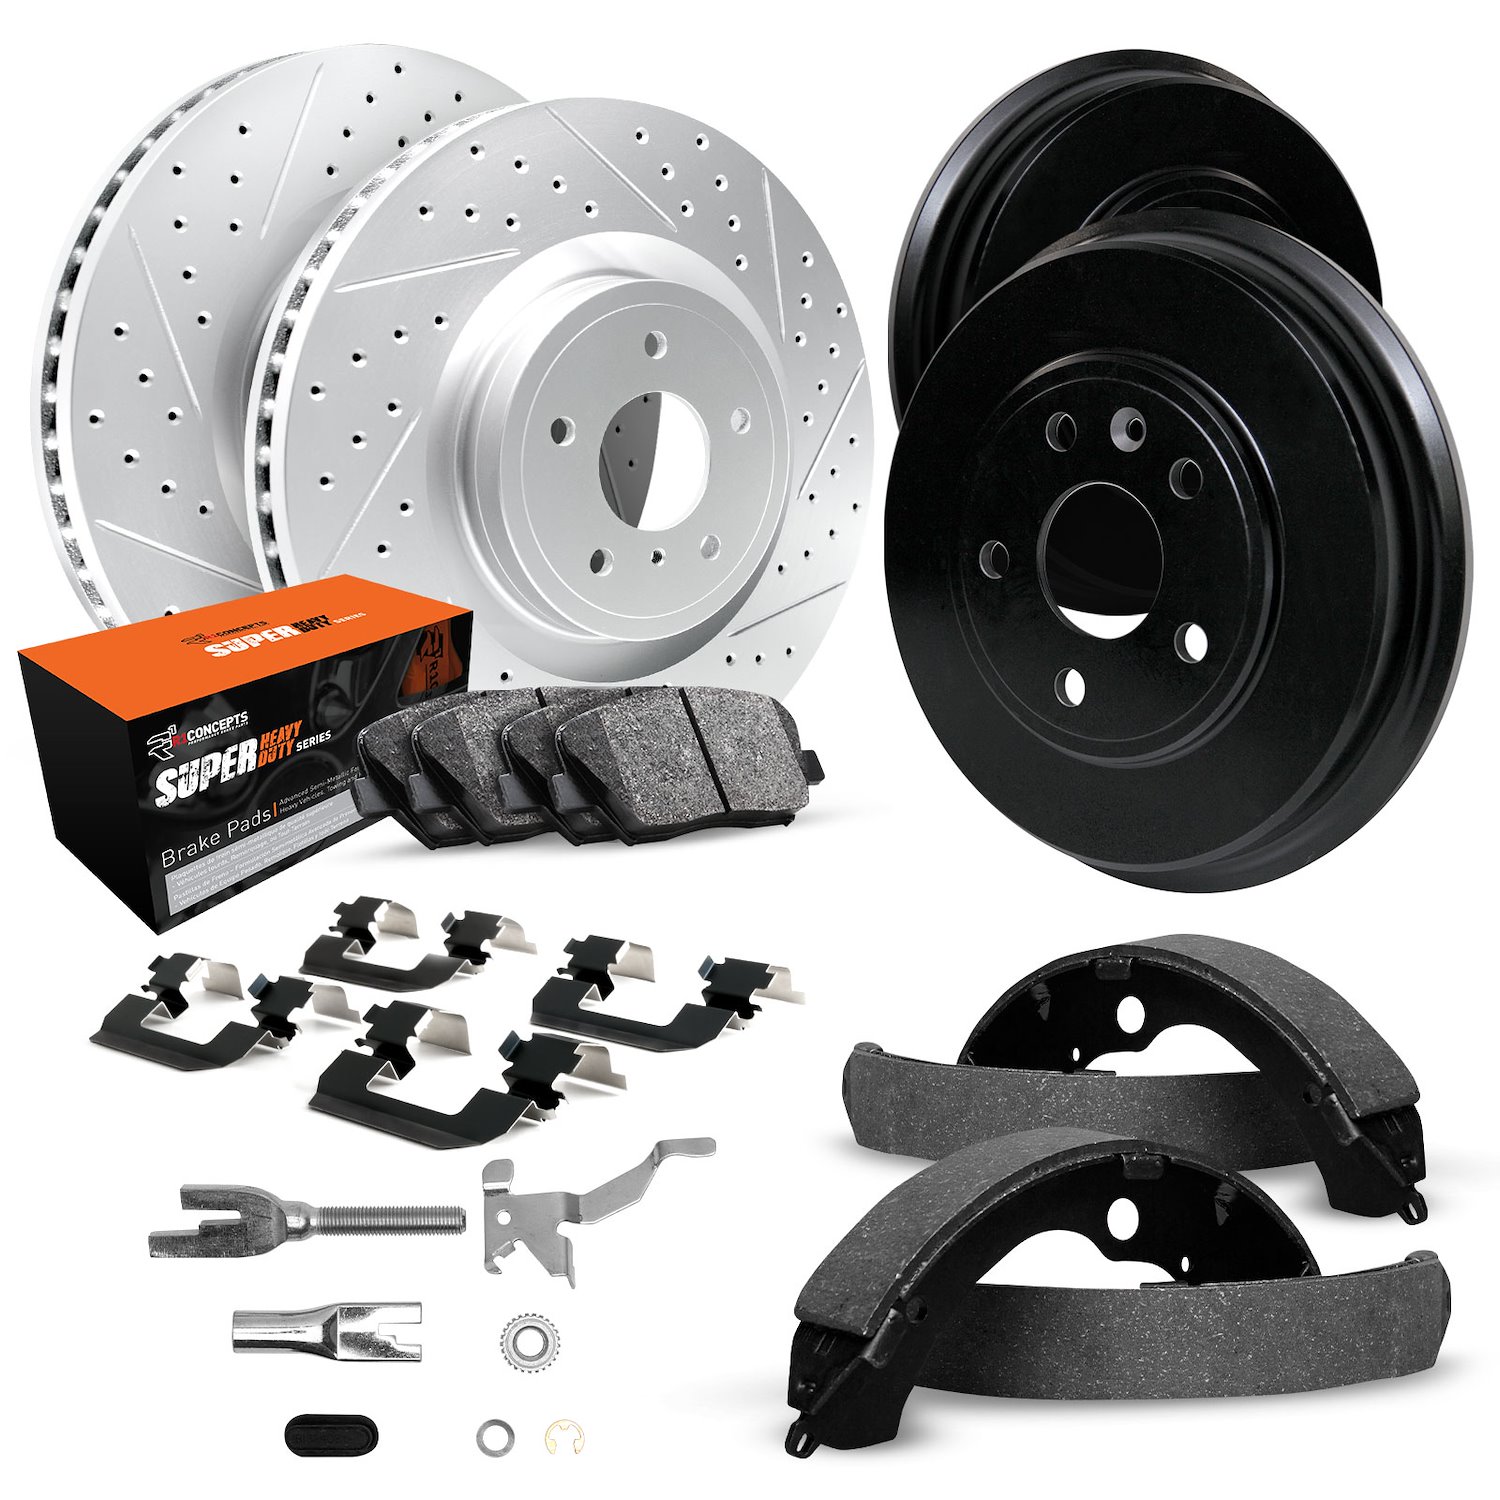 GEO-Carbon Drilled/Slotted Rotor/Drums w/Super-Duty Pads/Shoes/Hardware/Adjusters, 1998-2002 Ford/Mazda, Position: Front/Rear